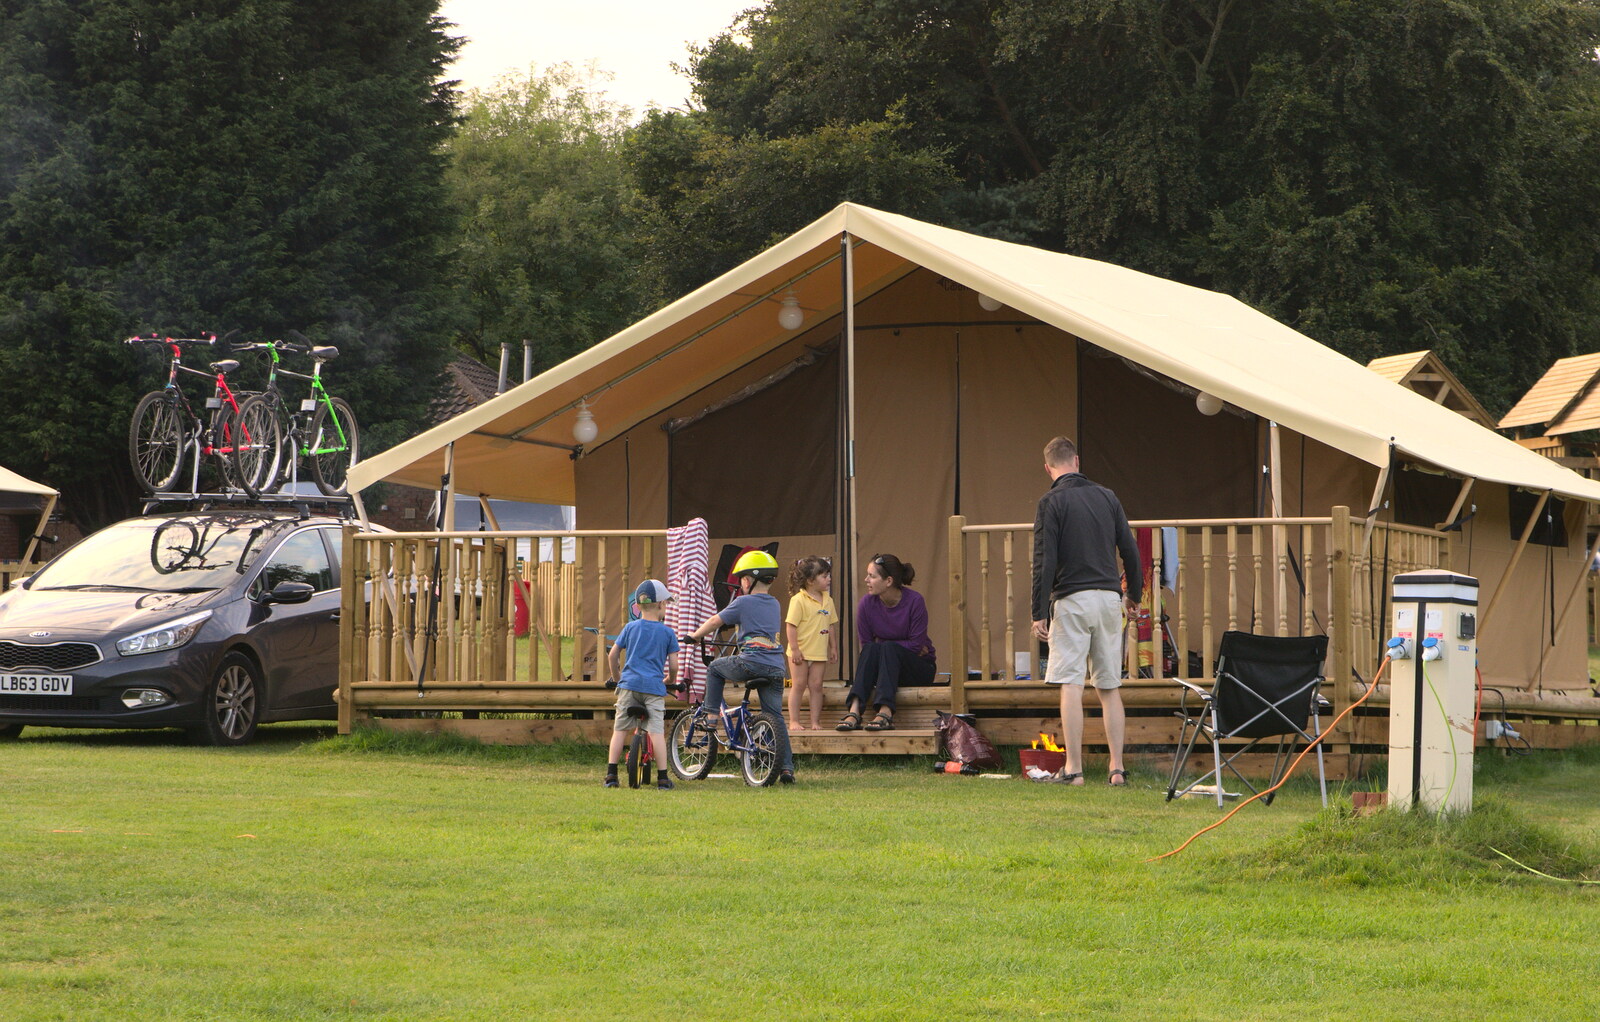 Fancy camping in lodges from Camping in West Runton, North Norfolk - 30th July 2016